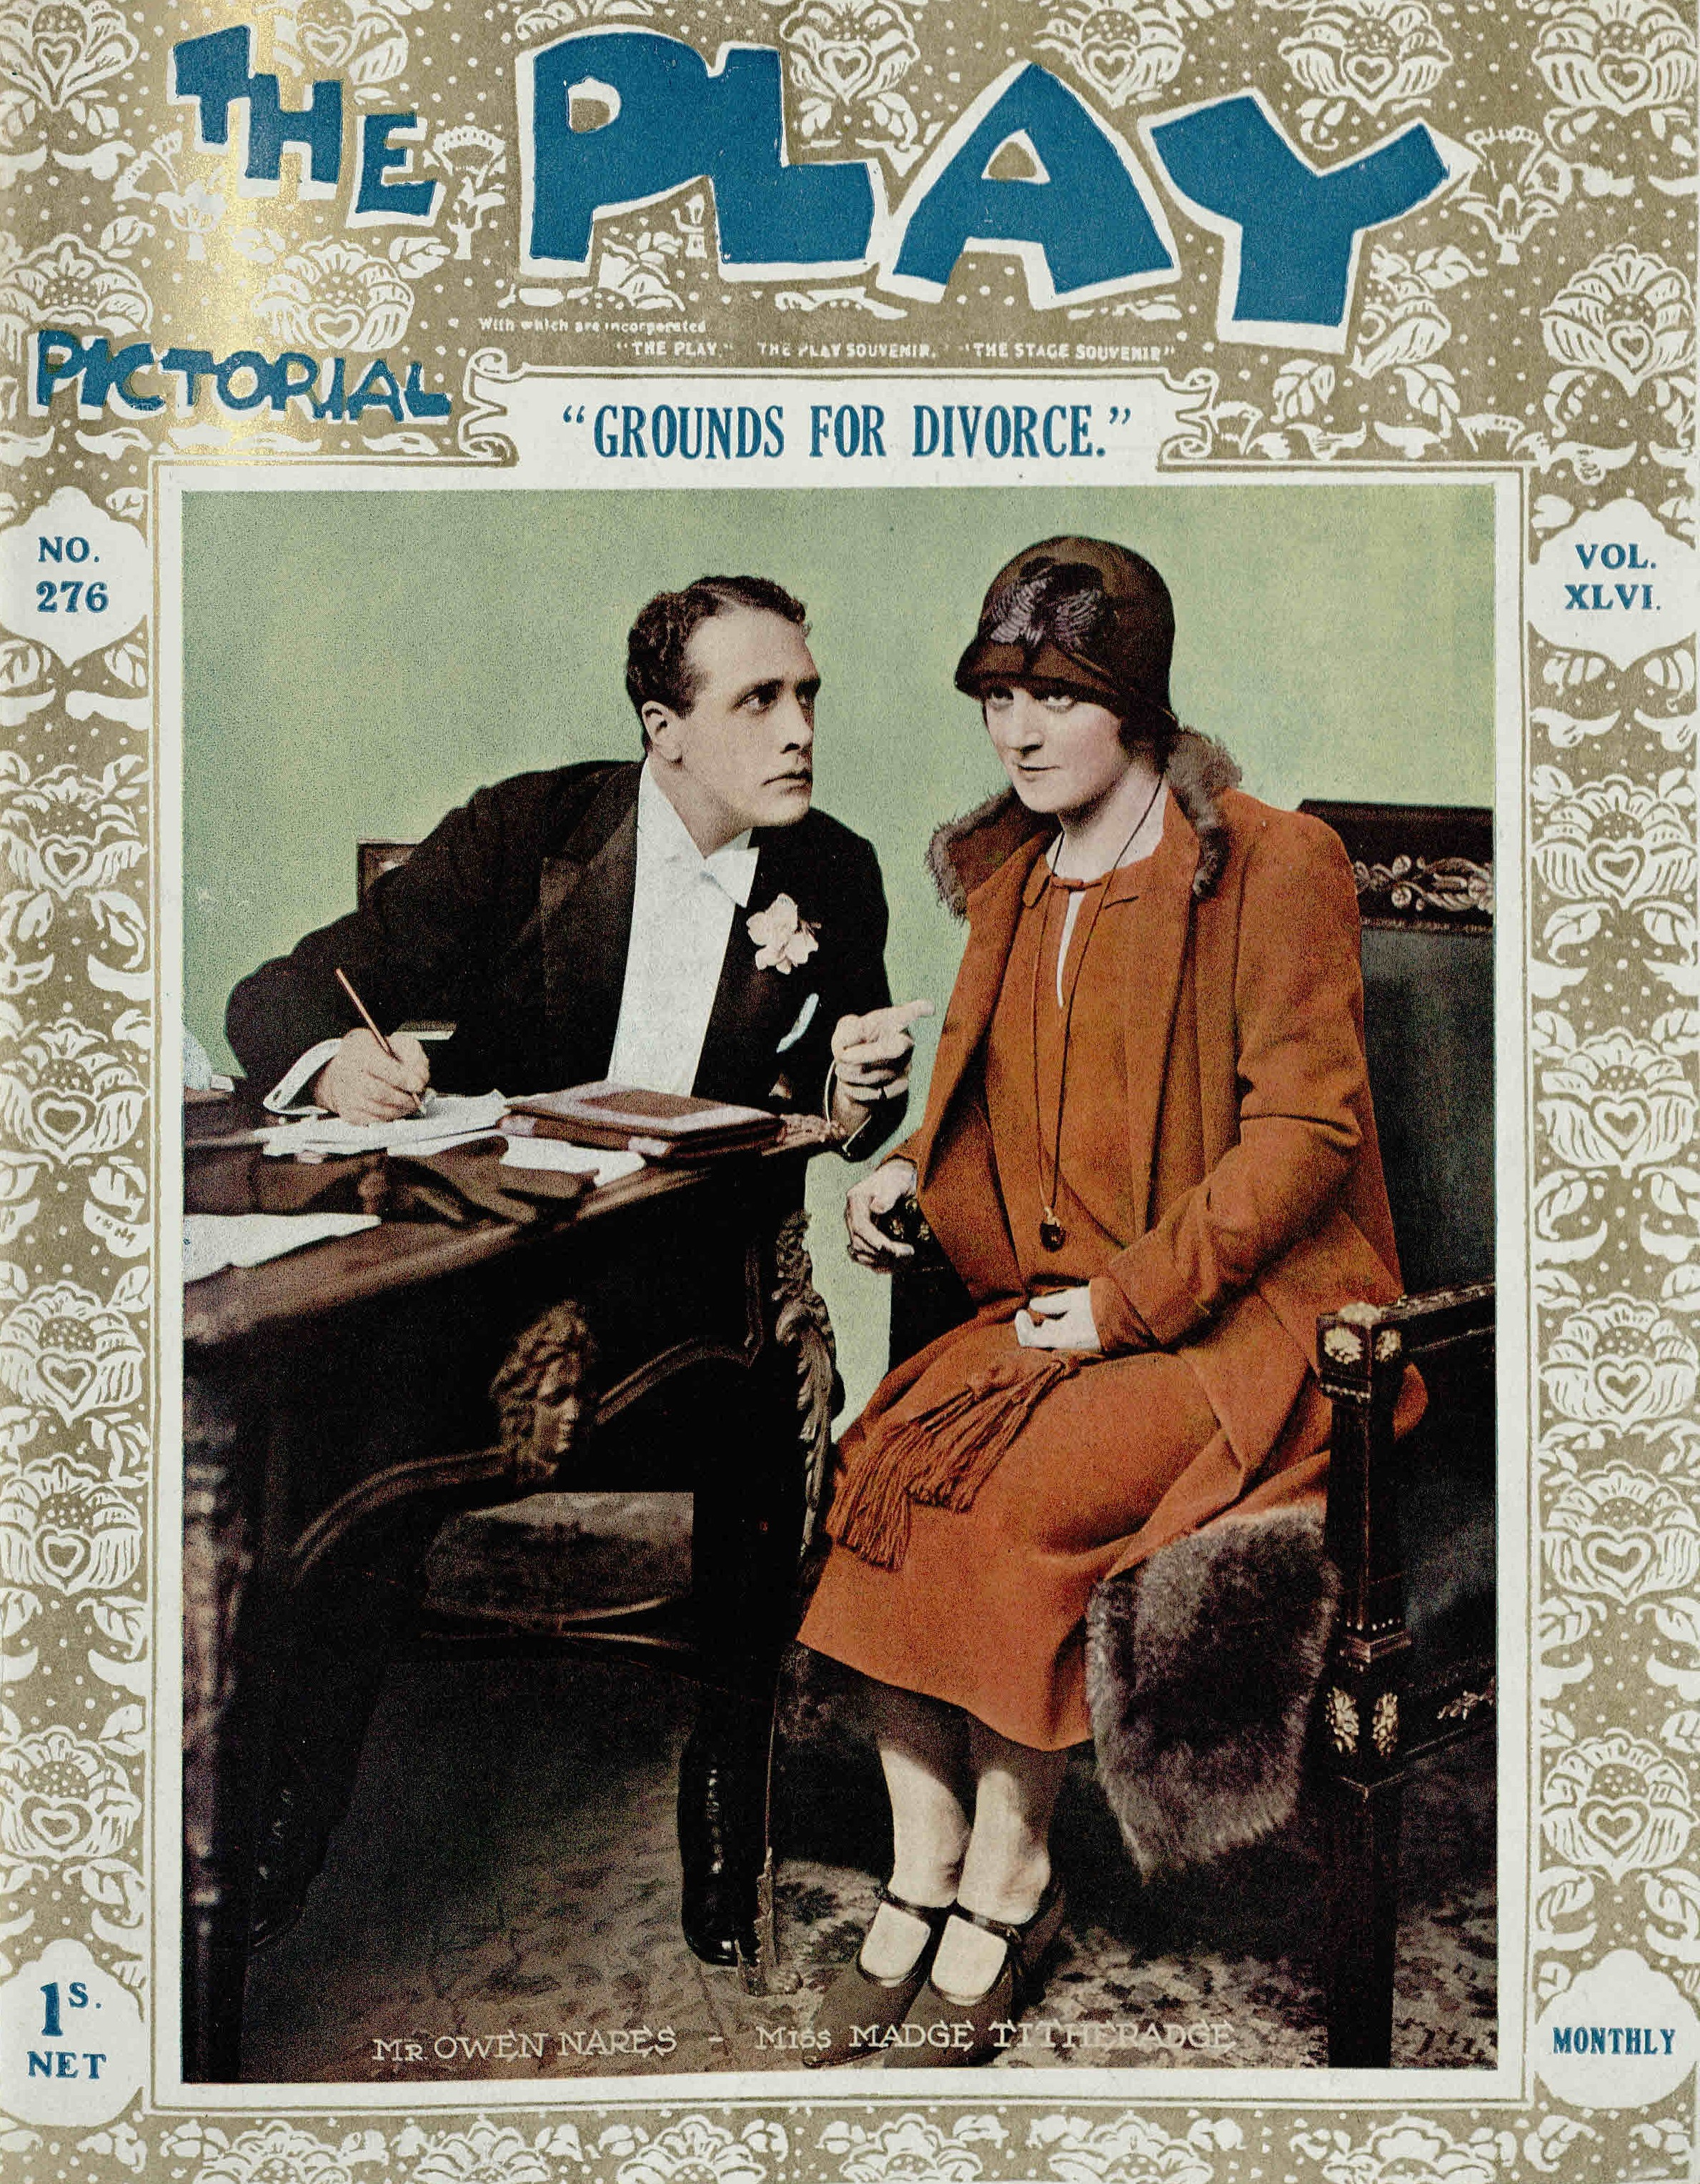 Front cover of Play Pictorial, featuring Grounds for Divorce